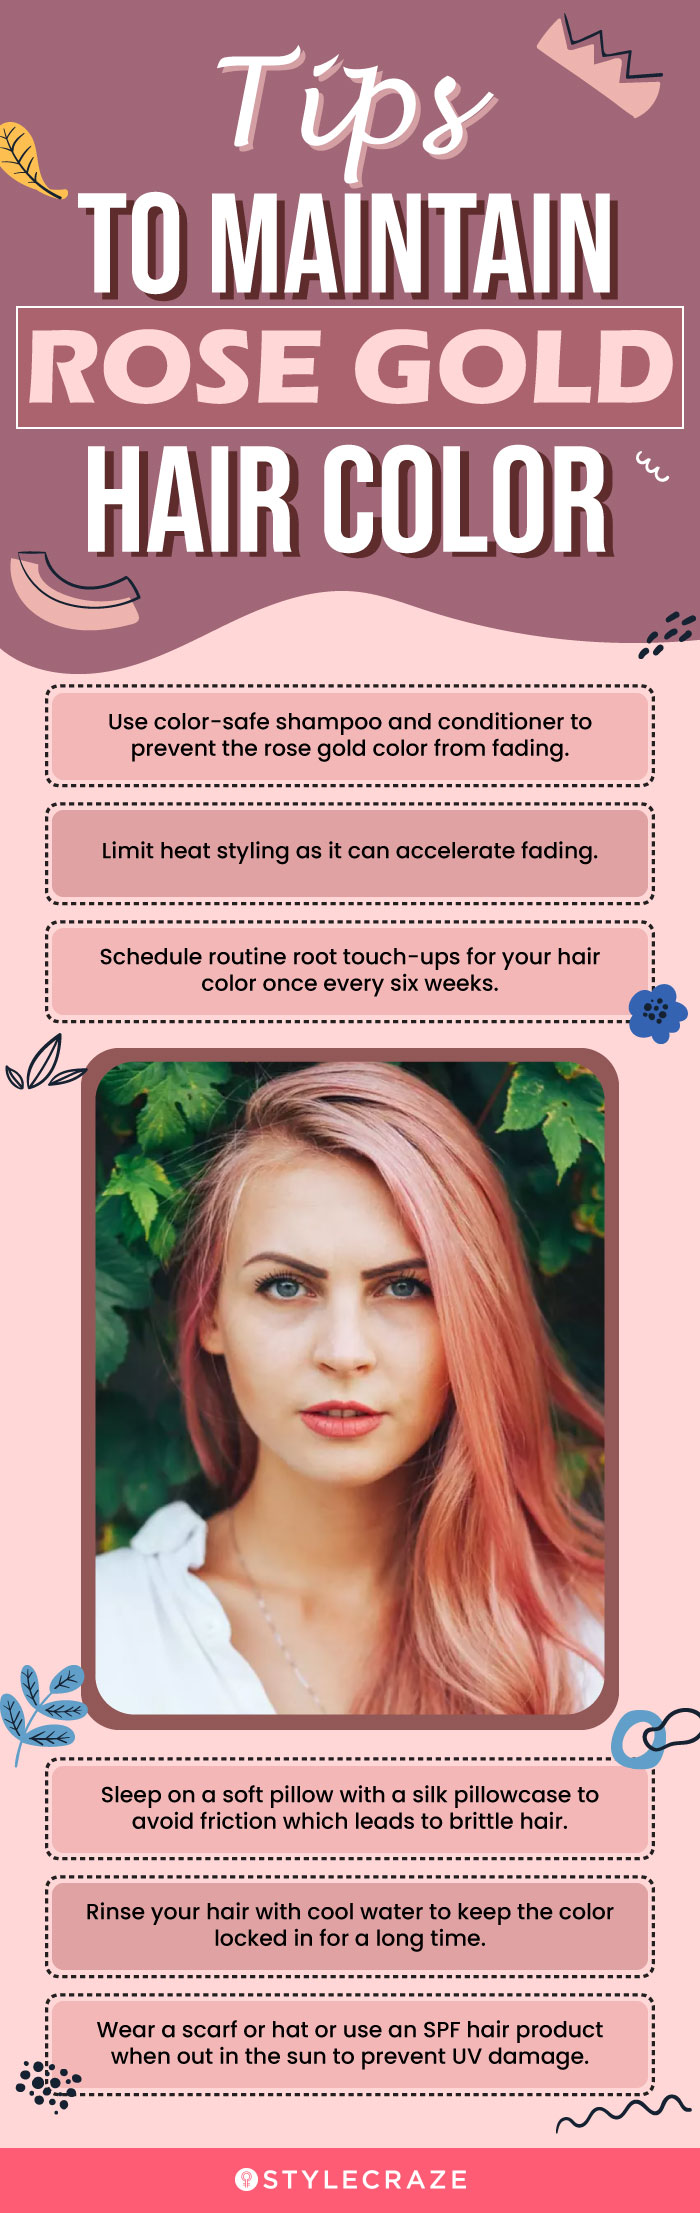 Tips To Maintain Rose Gold Hair Color (infographic)